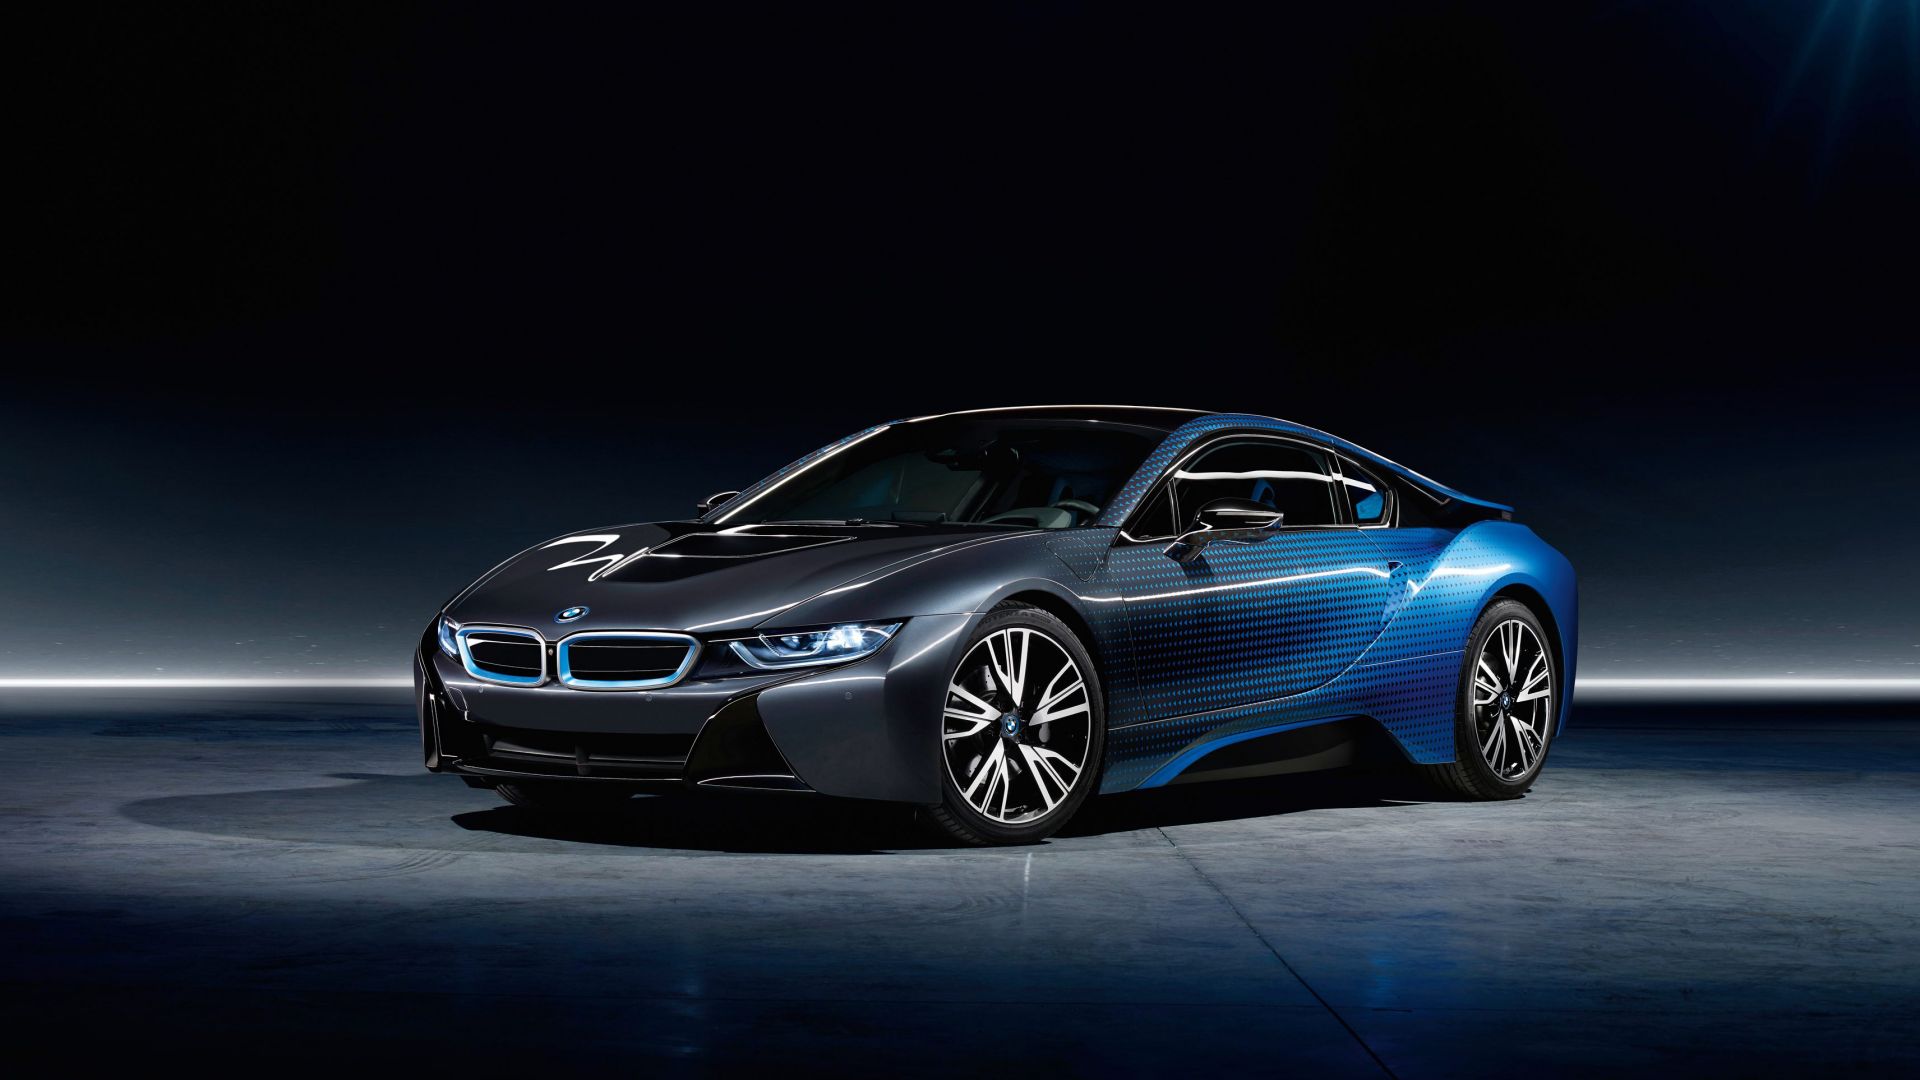 Wallpaper BMW sports cars, side view